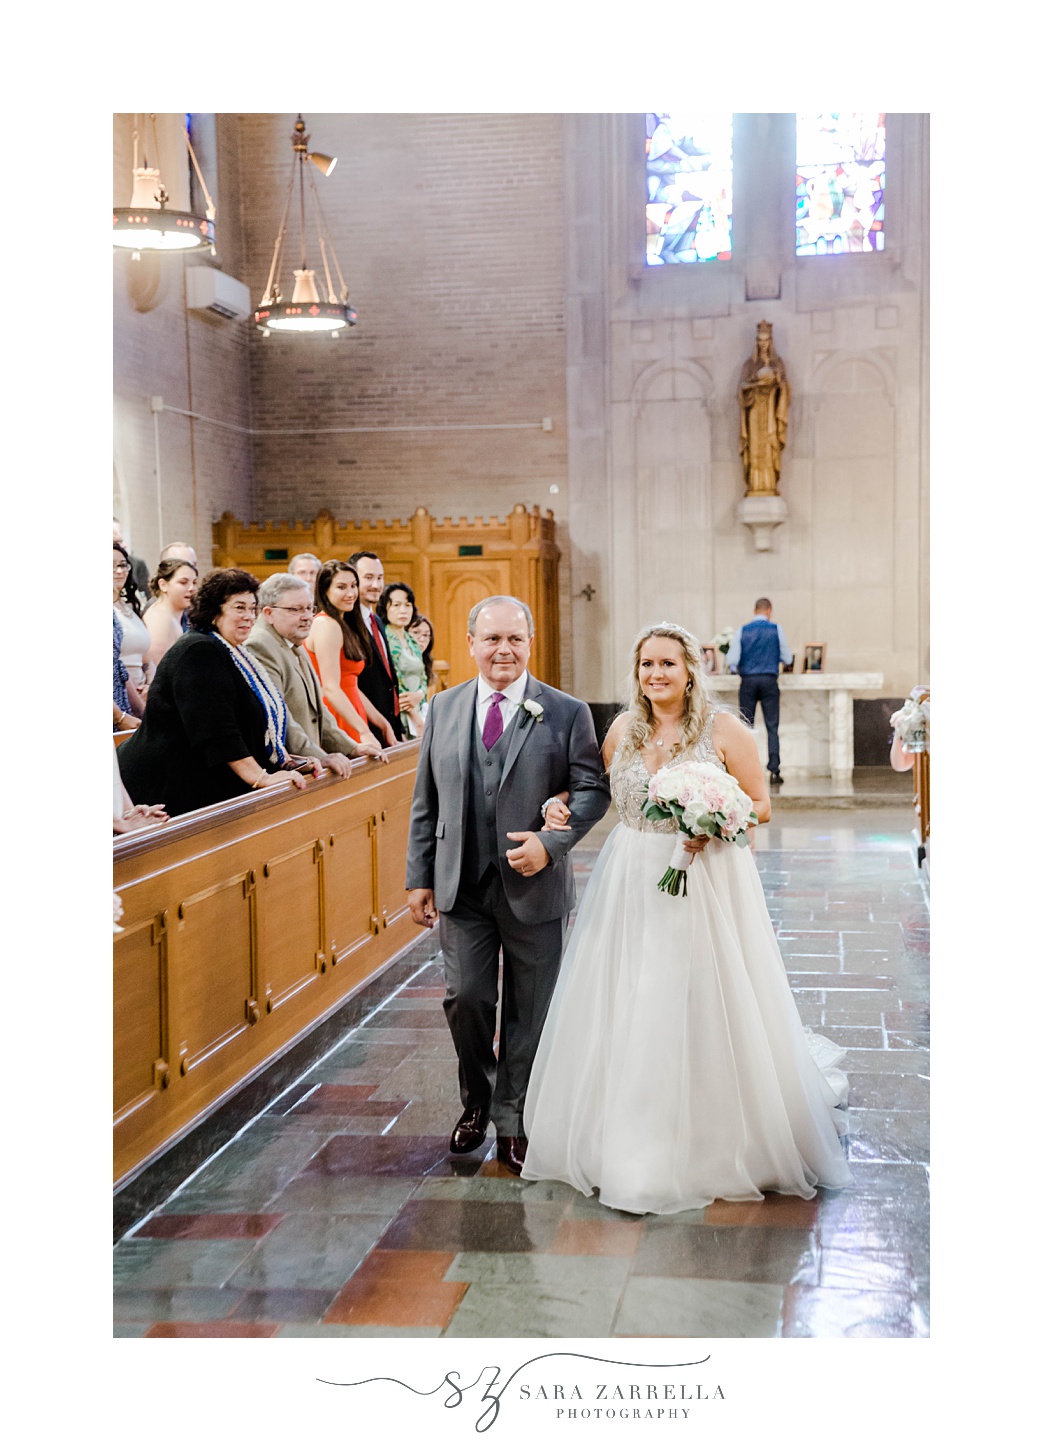 bride walks up aisle with father during traditional wedding ceremony in Rhode Island church